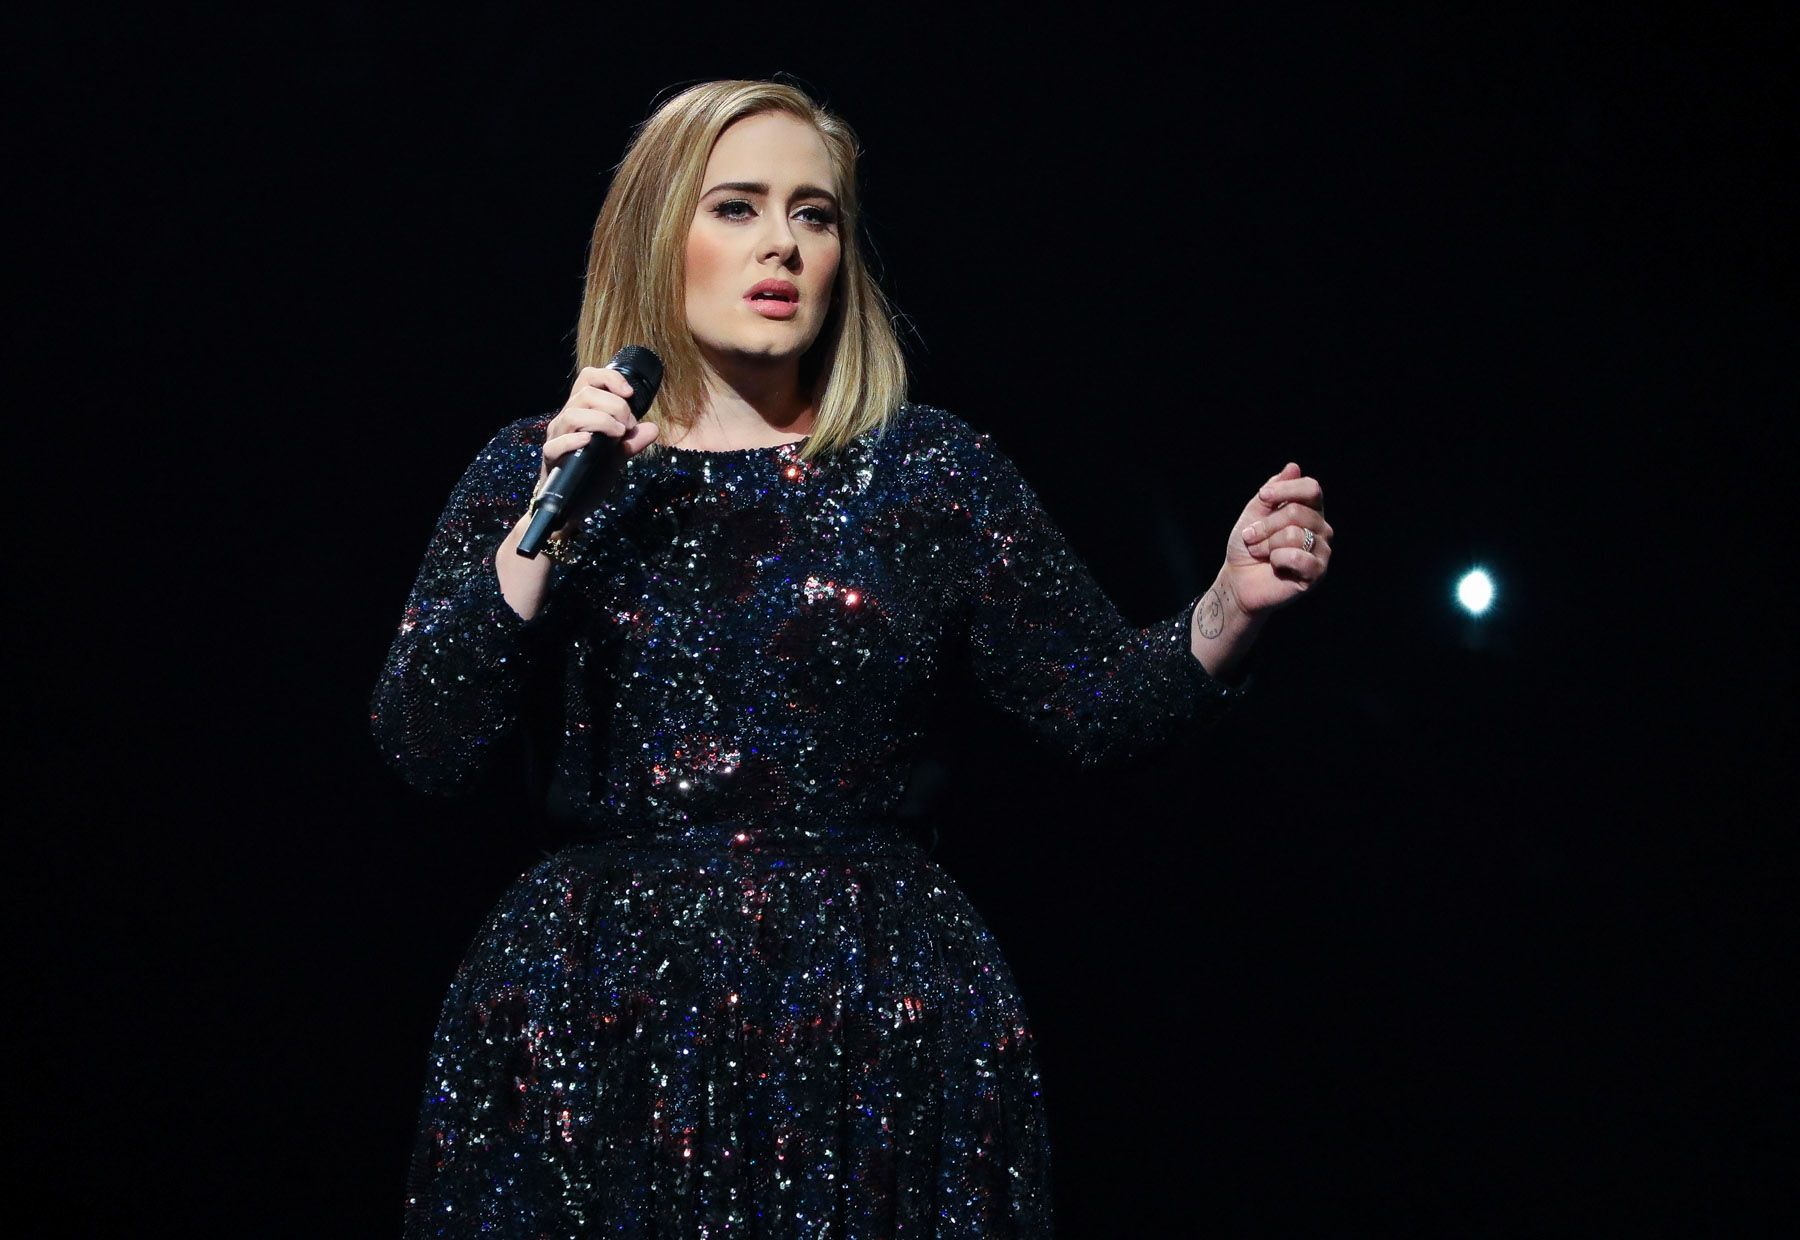 Adele, during her live performance